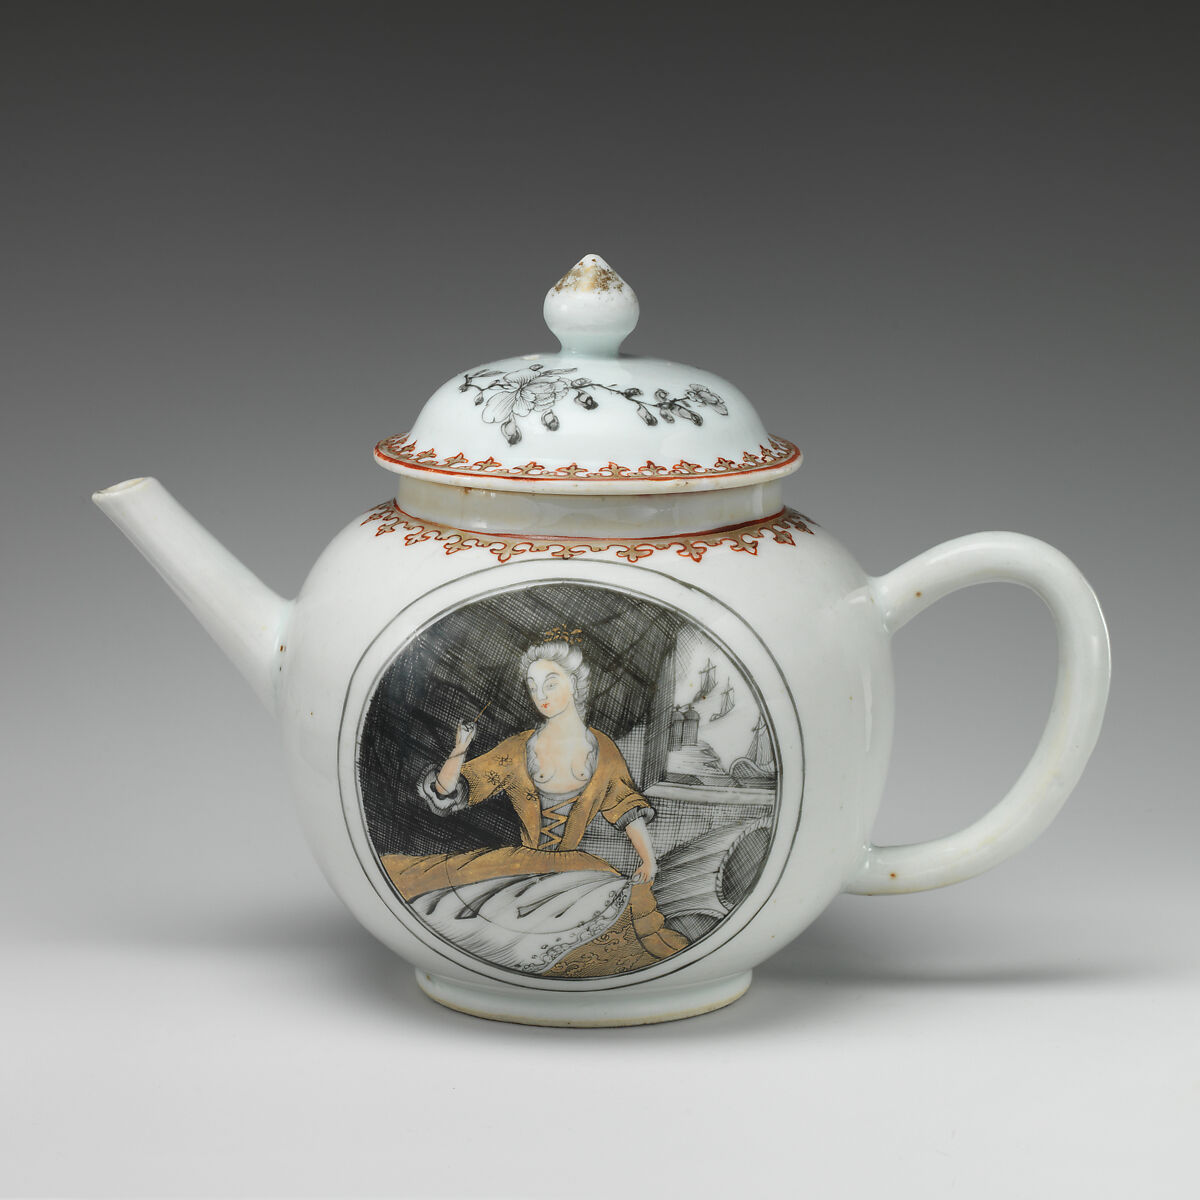 Teapot with portrait of a woman (part of a service), Hard-paste porcelain with enamel decoration and gilding, Chinese, possibly for Dutch market 